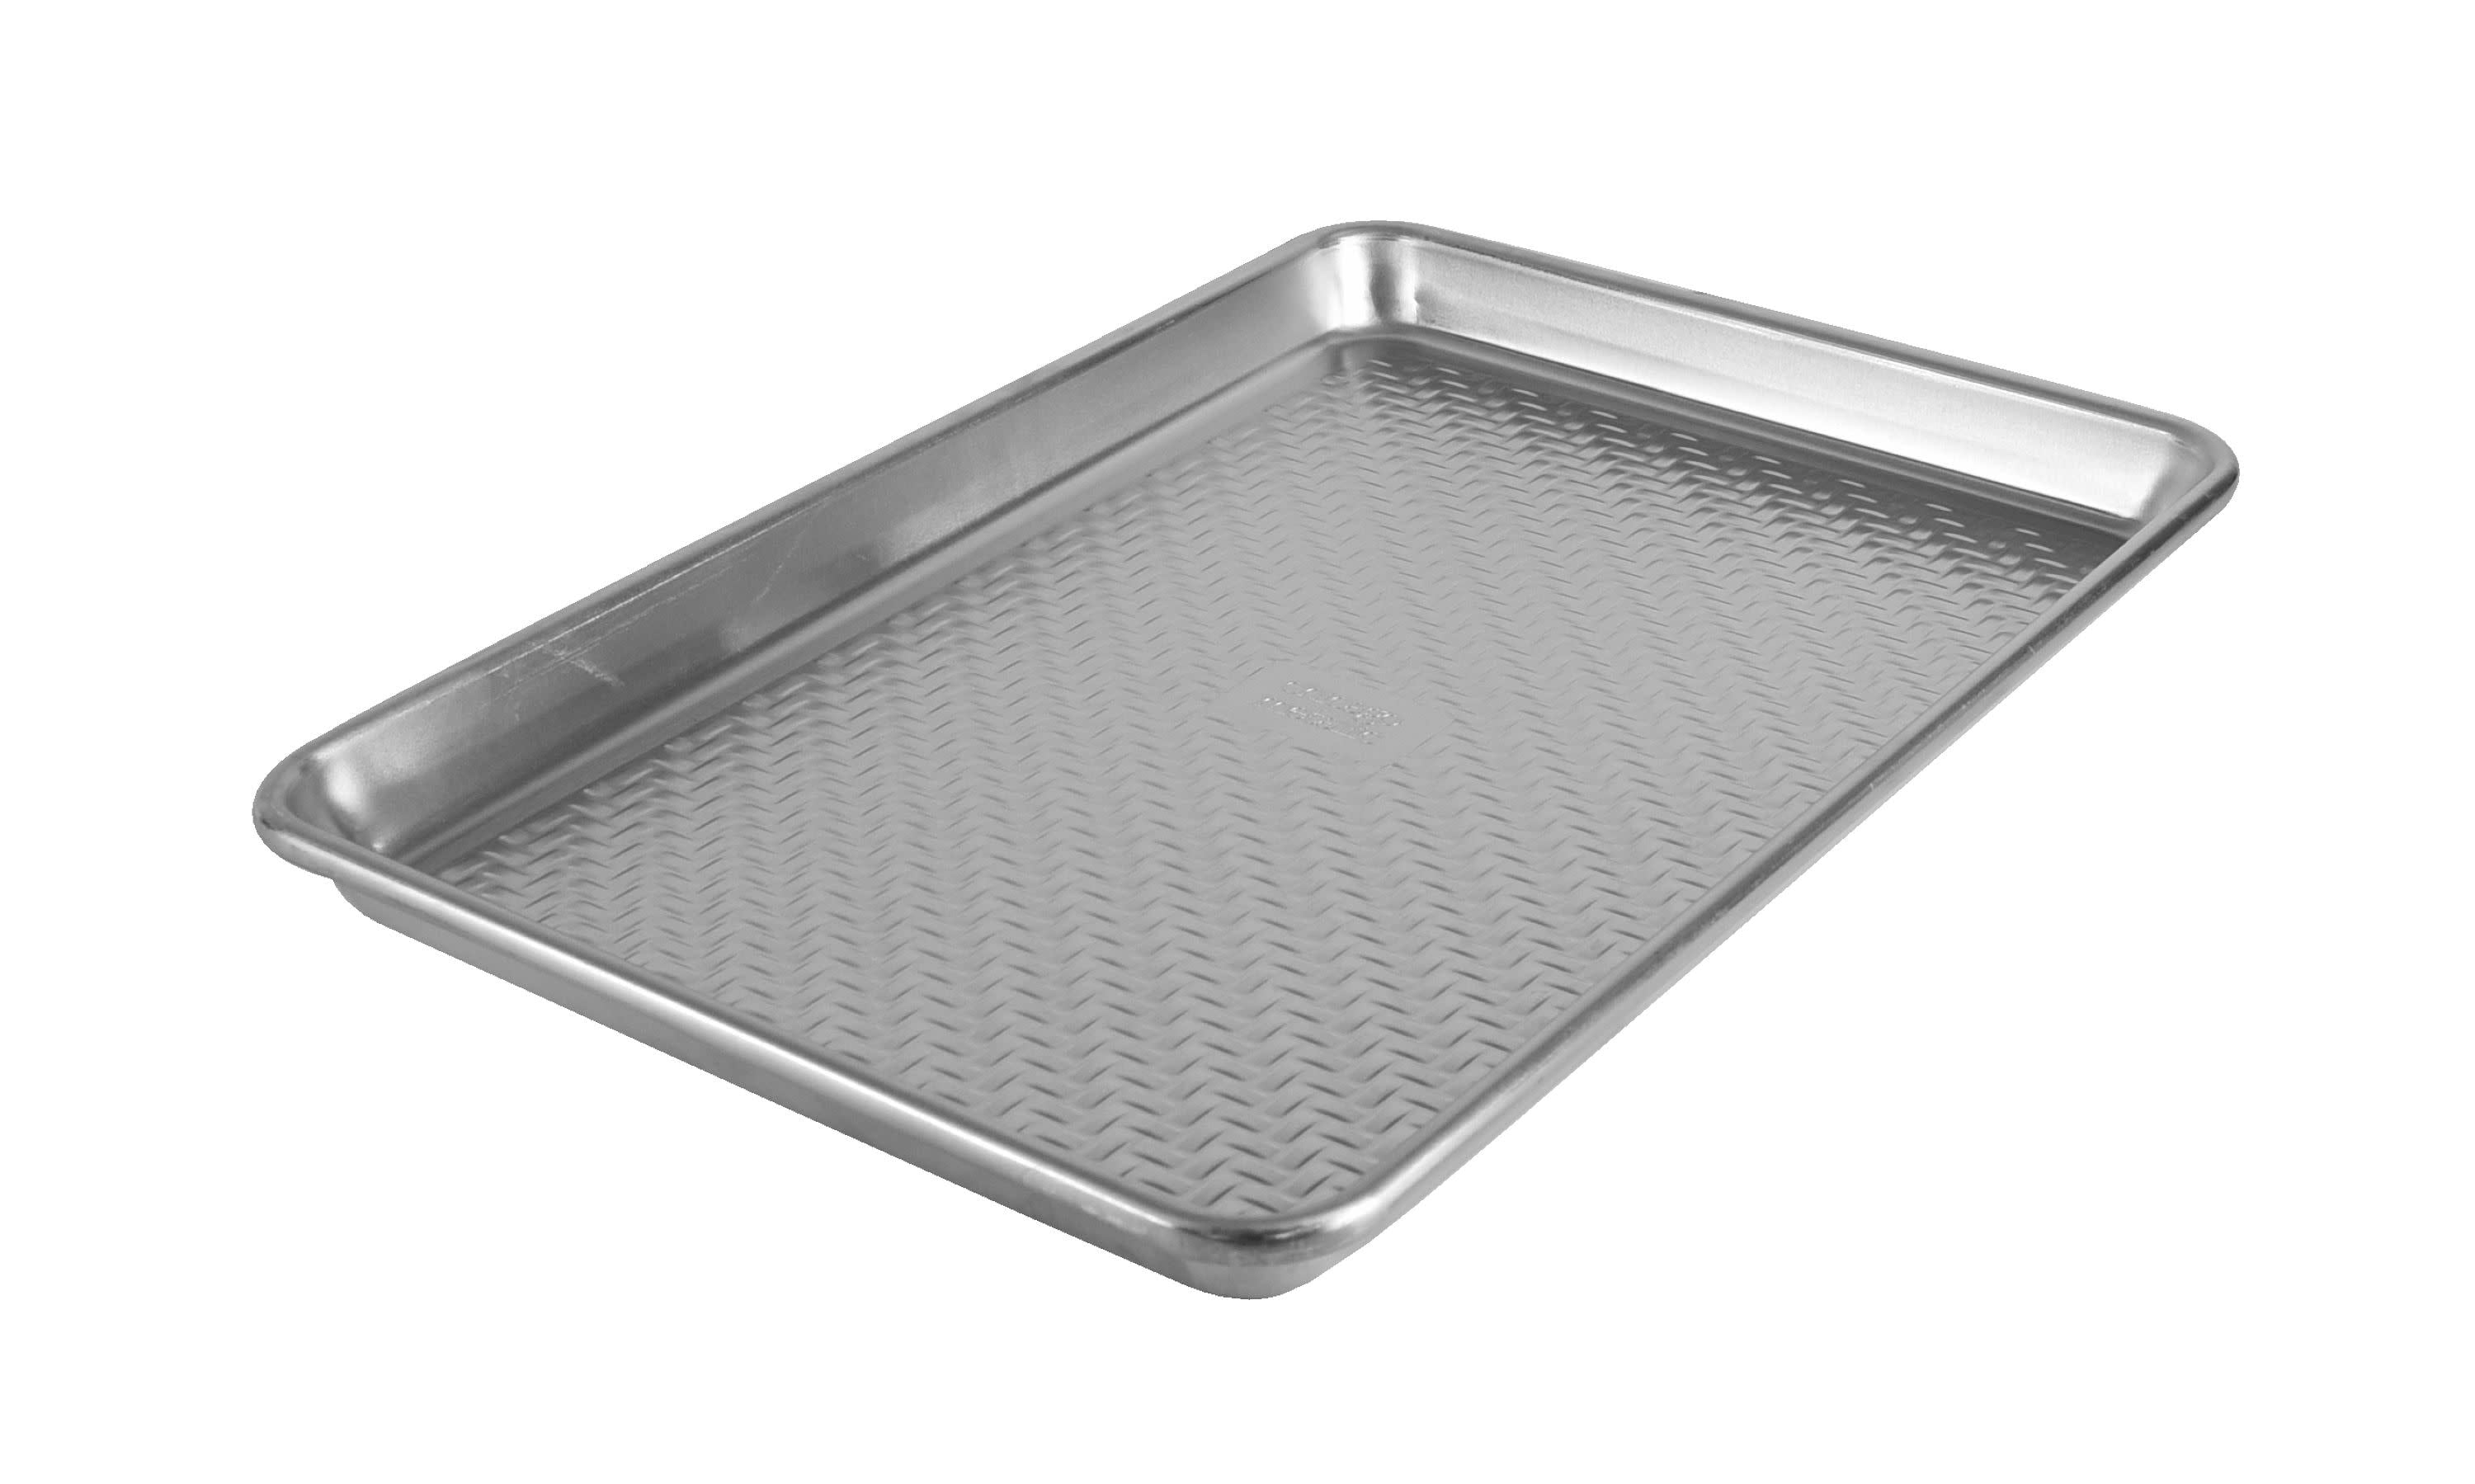 Chicago Metallic Commercial II Jelly Roll Pans (Set of 2)